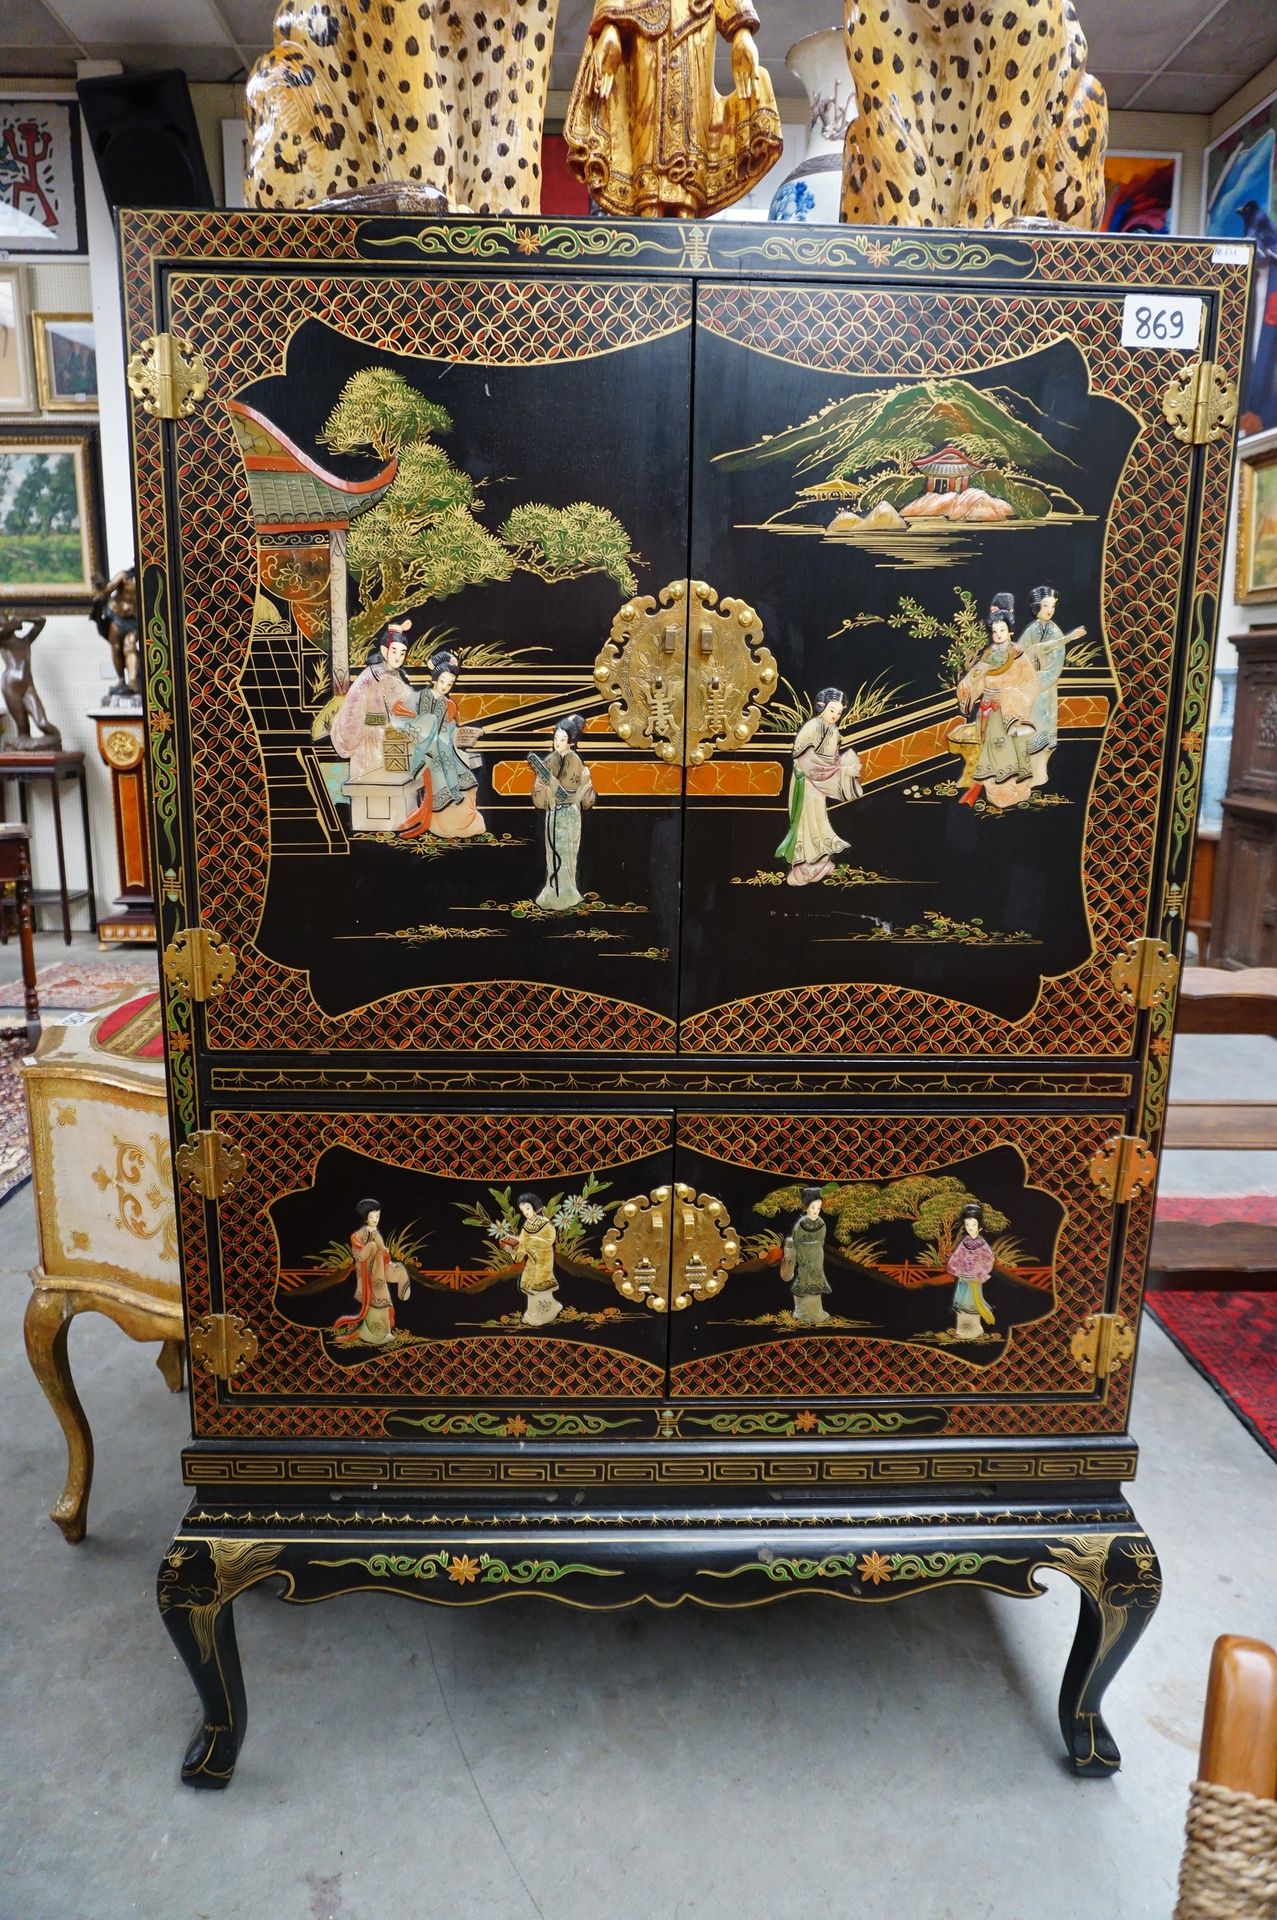 Null Chinese cabinet with 4 doors - Laque de Chine - Decor with Gheishas - H: 14&hellip;